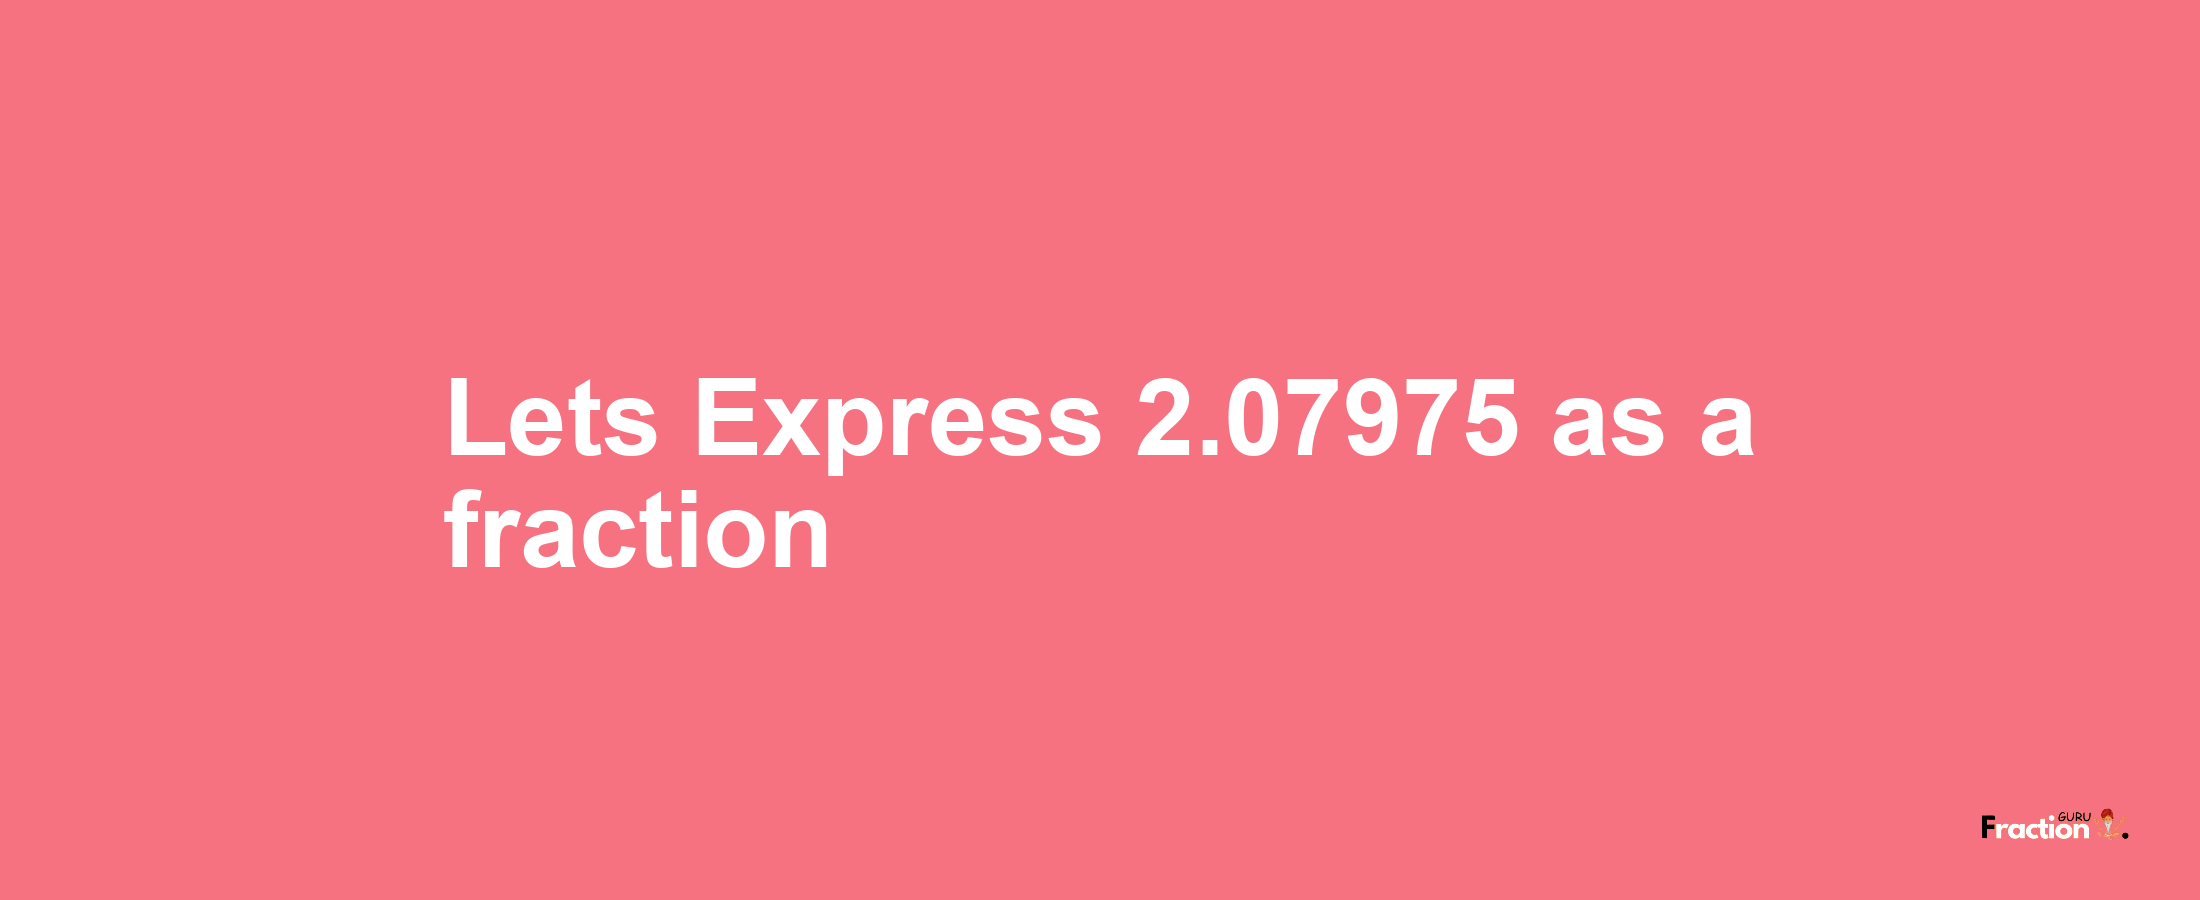 Lets Express 2.07975 as afraction